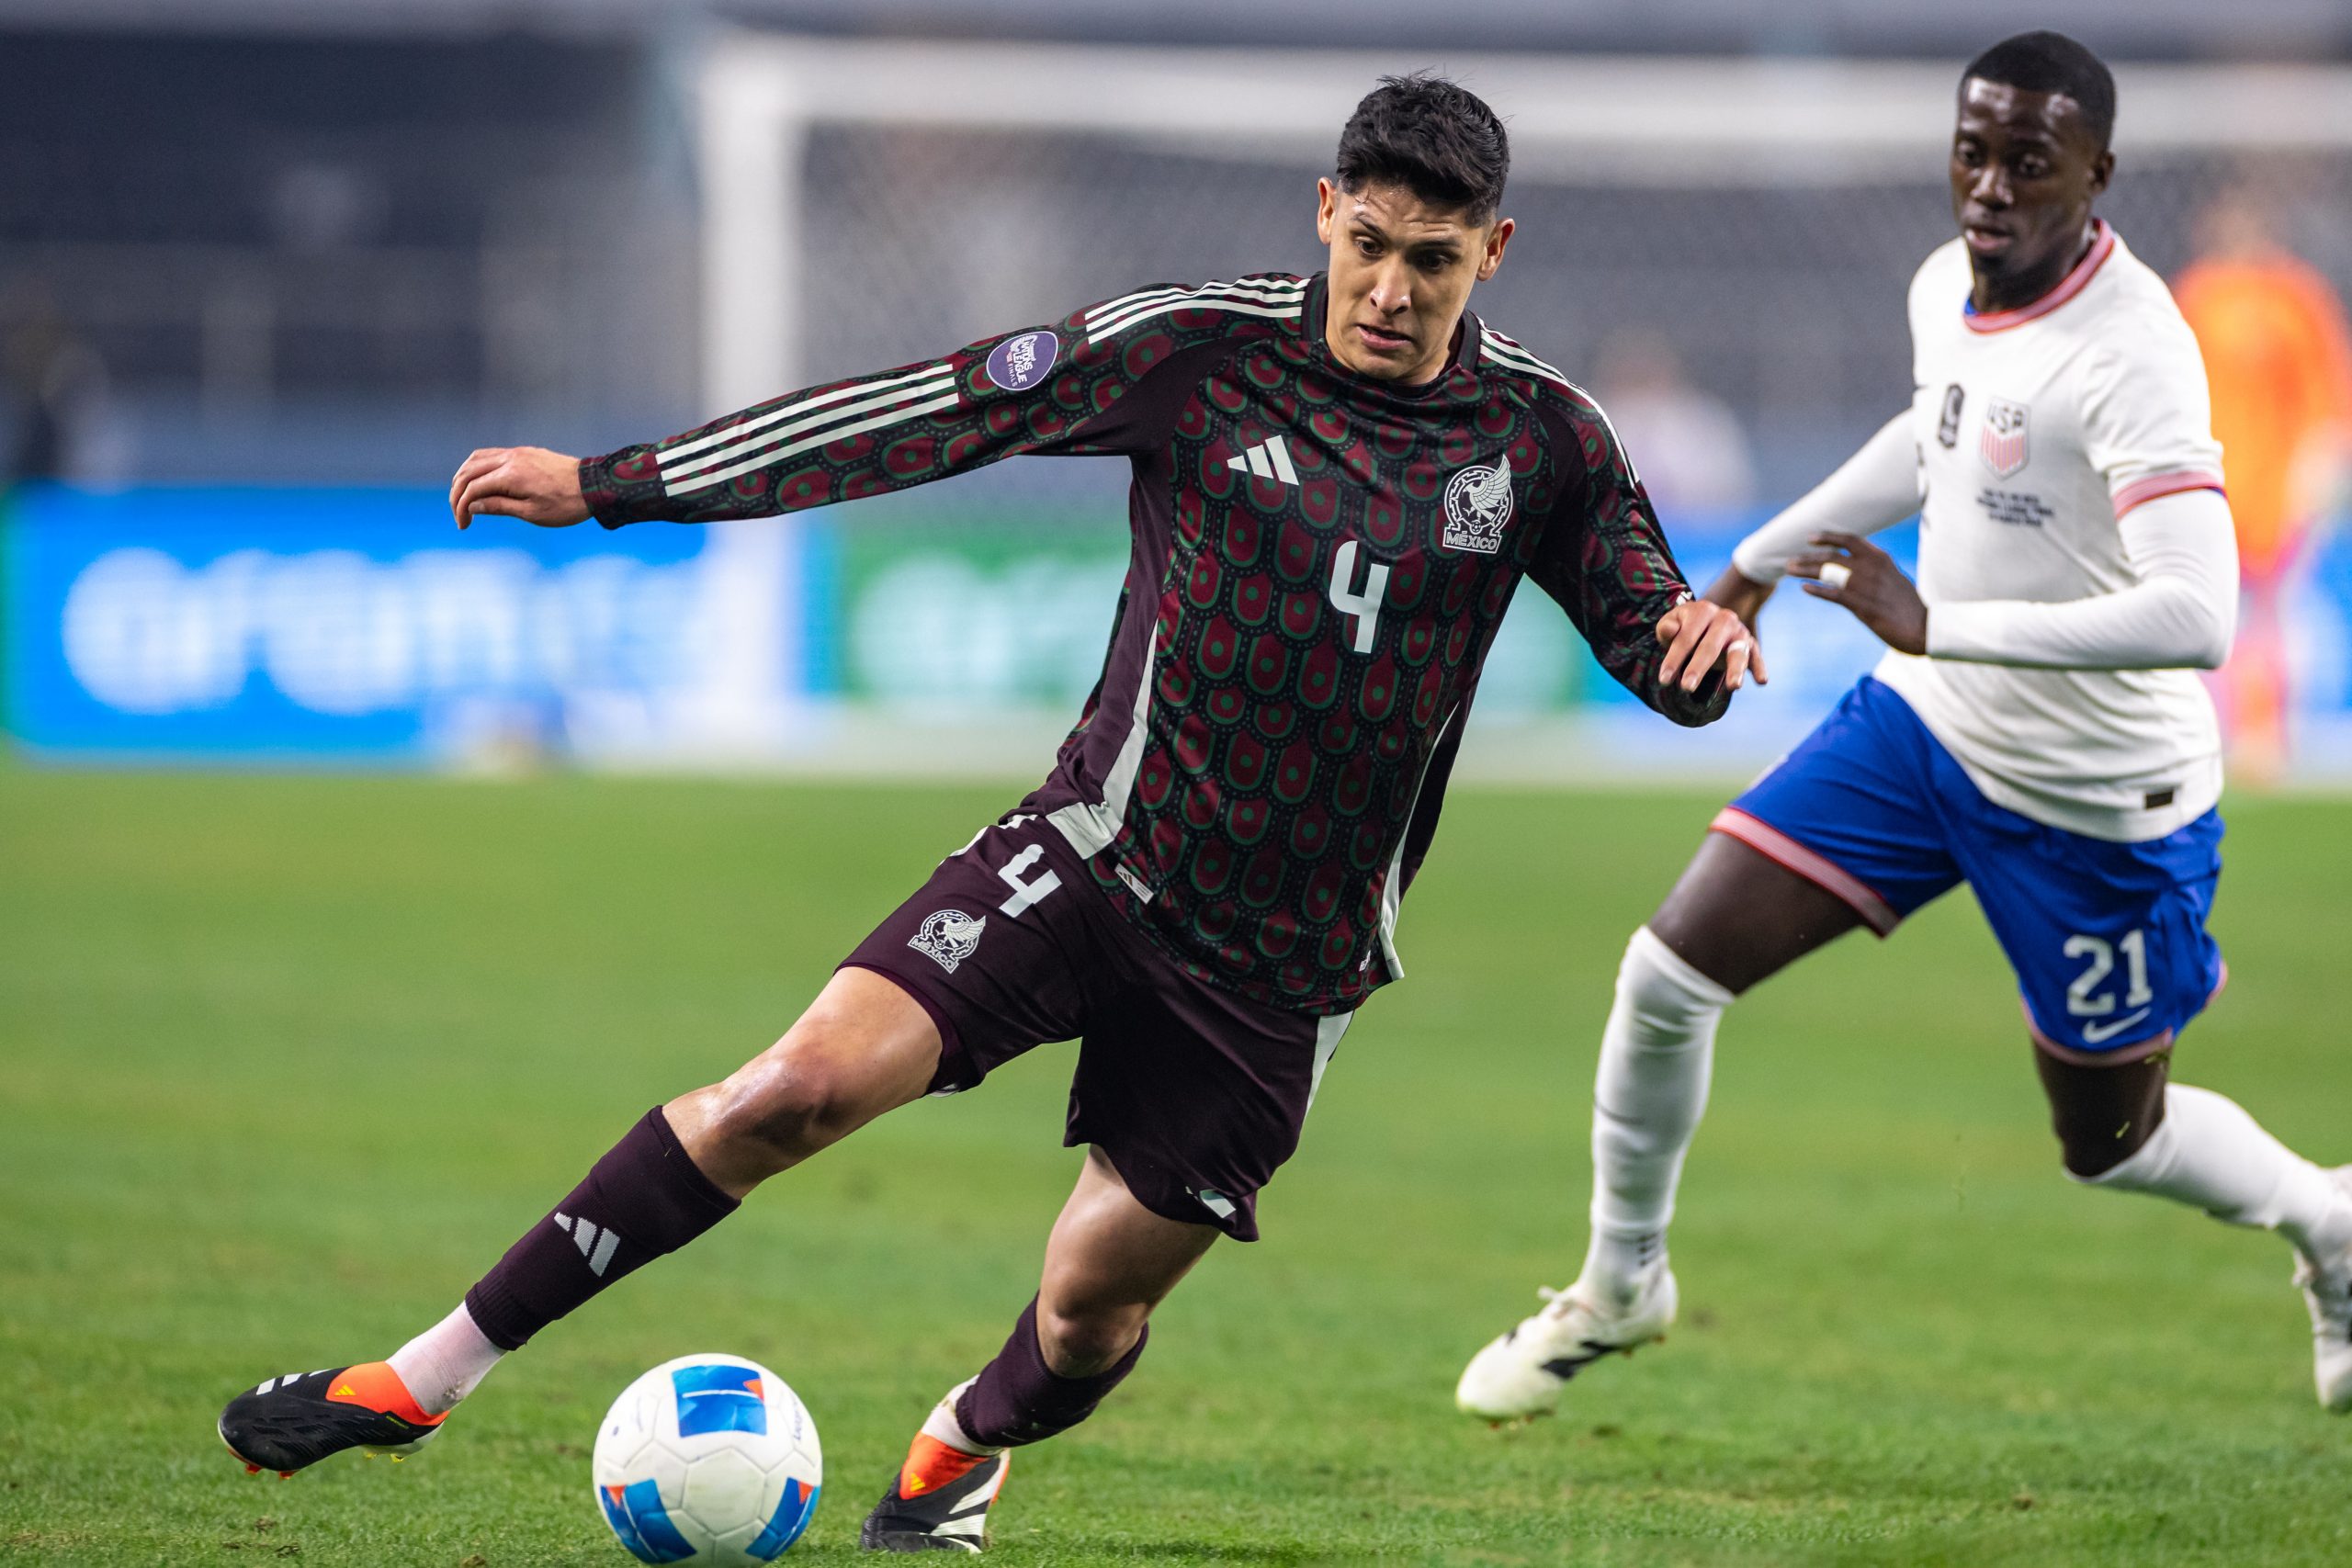 Edson Alvarez cuts back against the US in the USA's 2-0 Nations League Final win over Mexico, March 24, 2024. (Matt Visinsky, 3rd Degree)